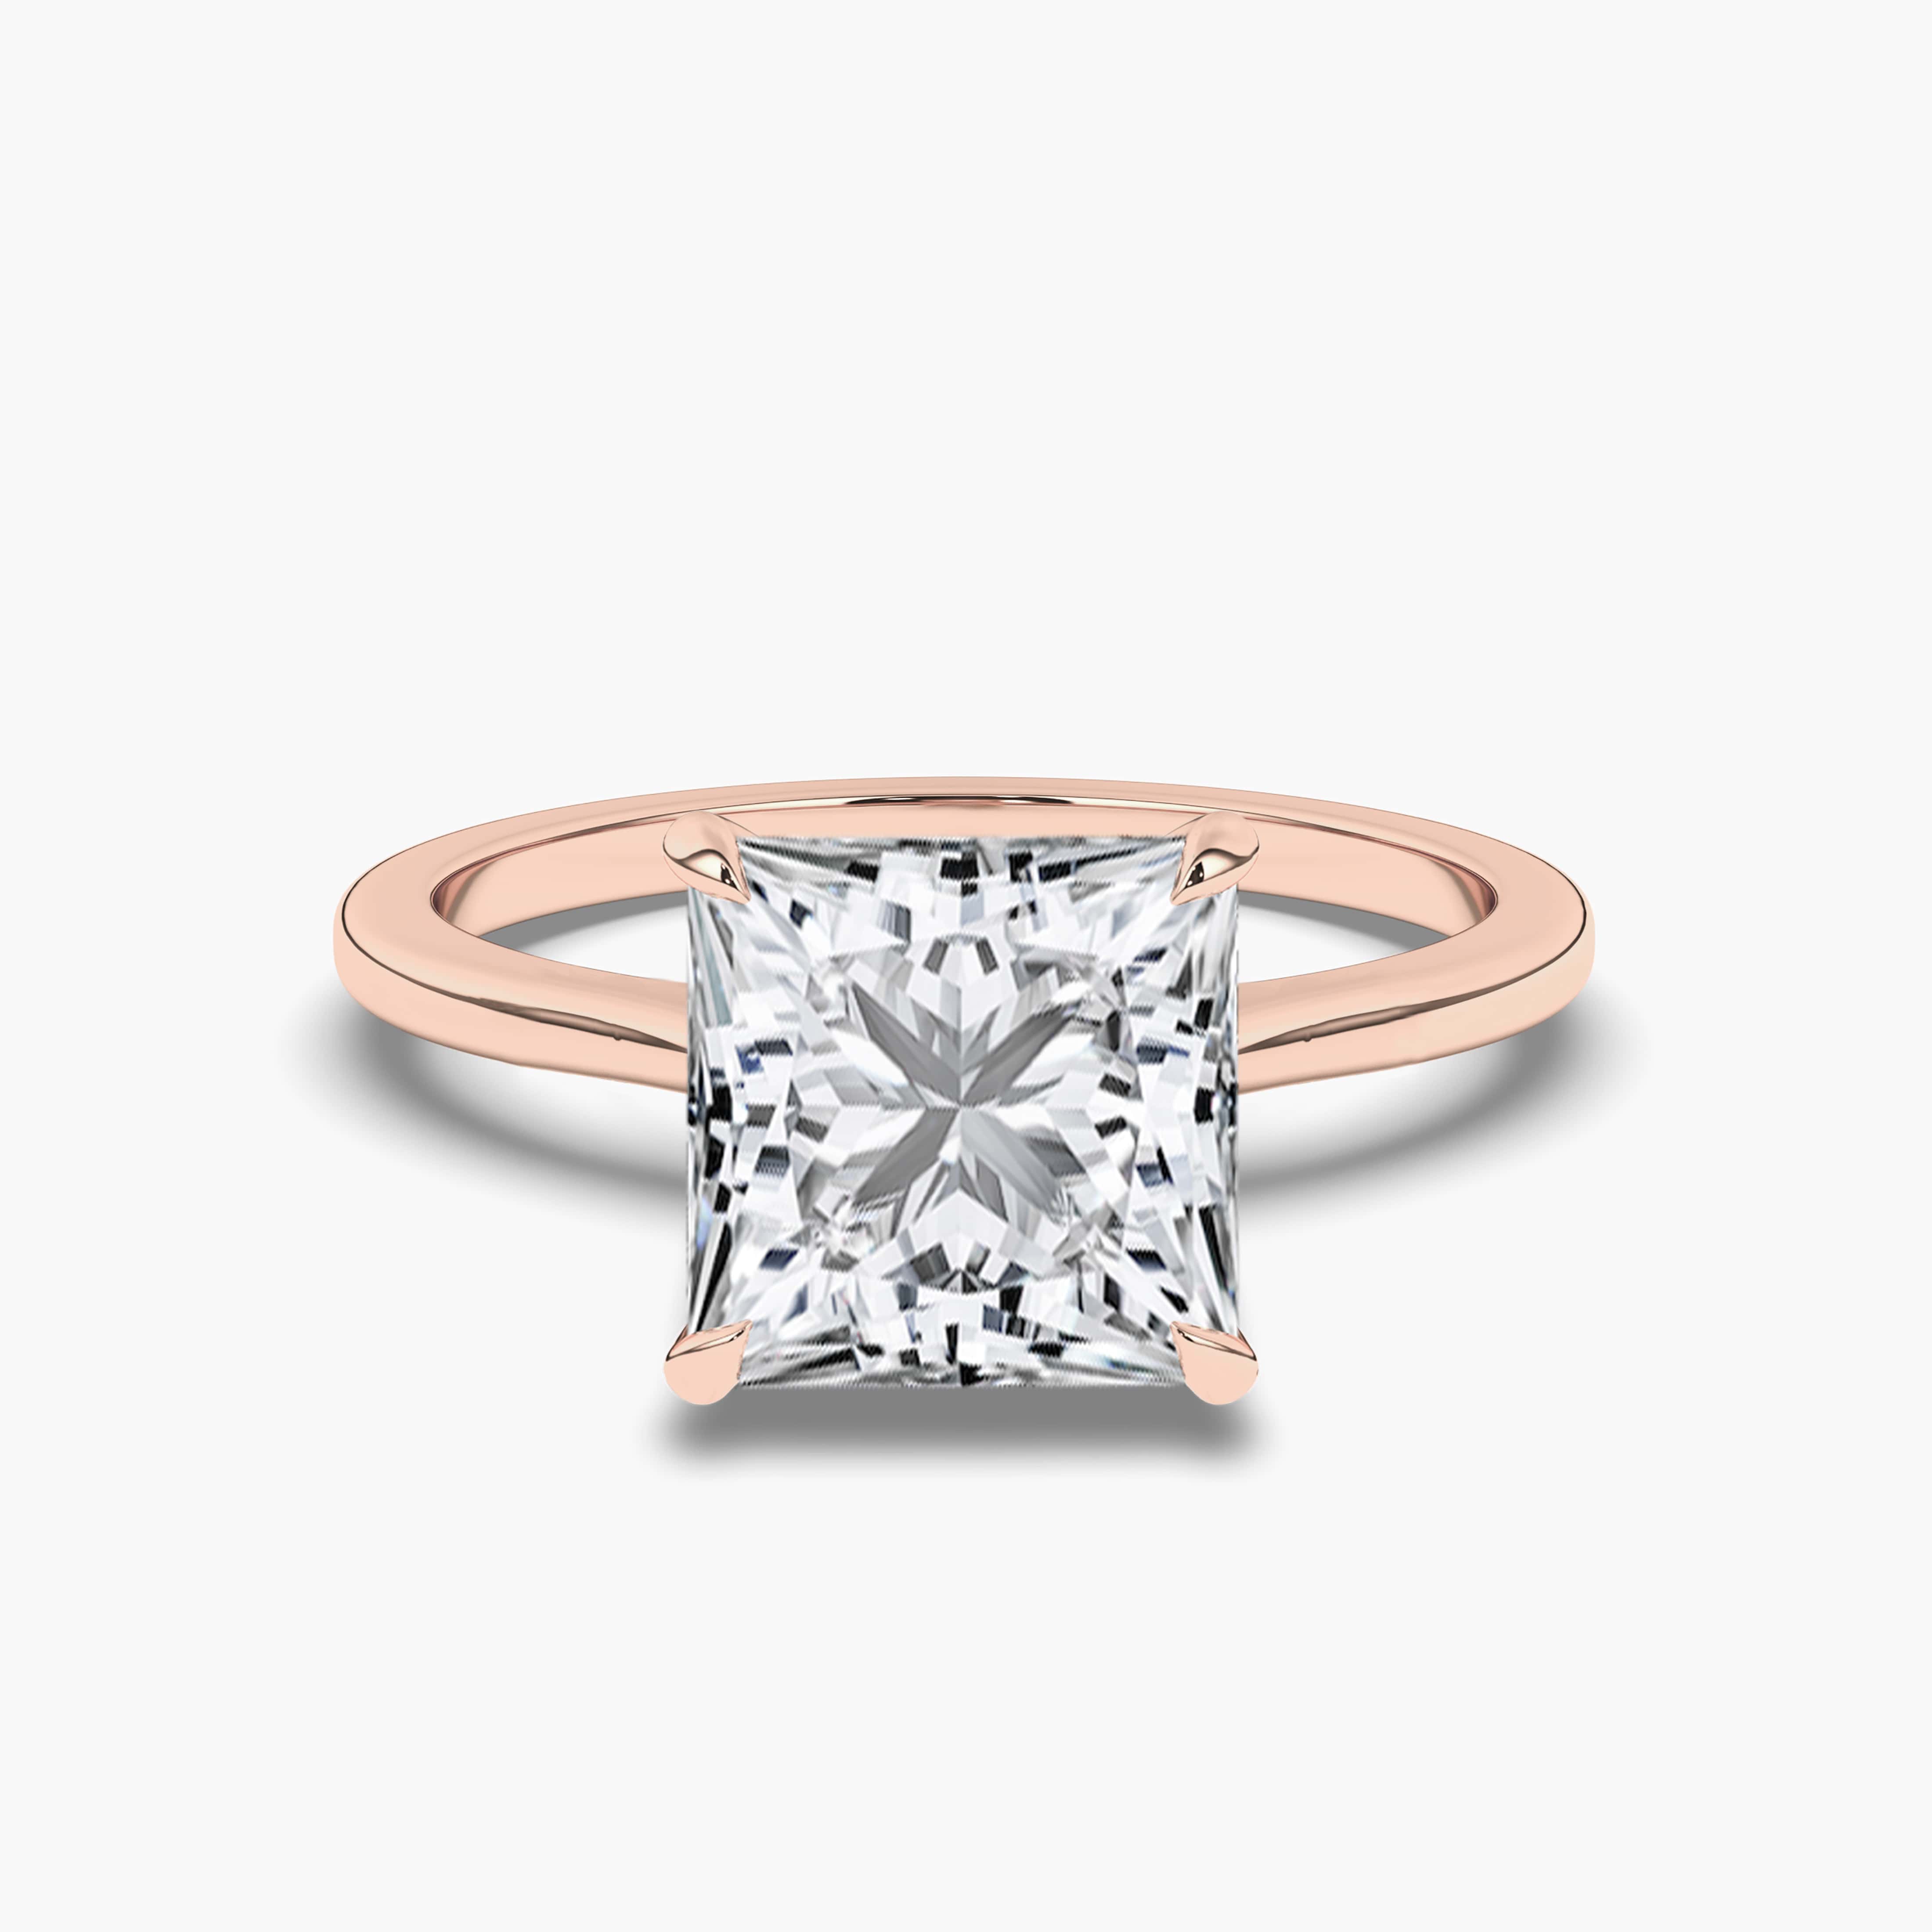 Princess-Cut Diamond Solitaire Engagement Ring in Rose Gold